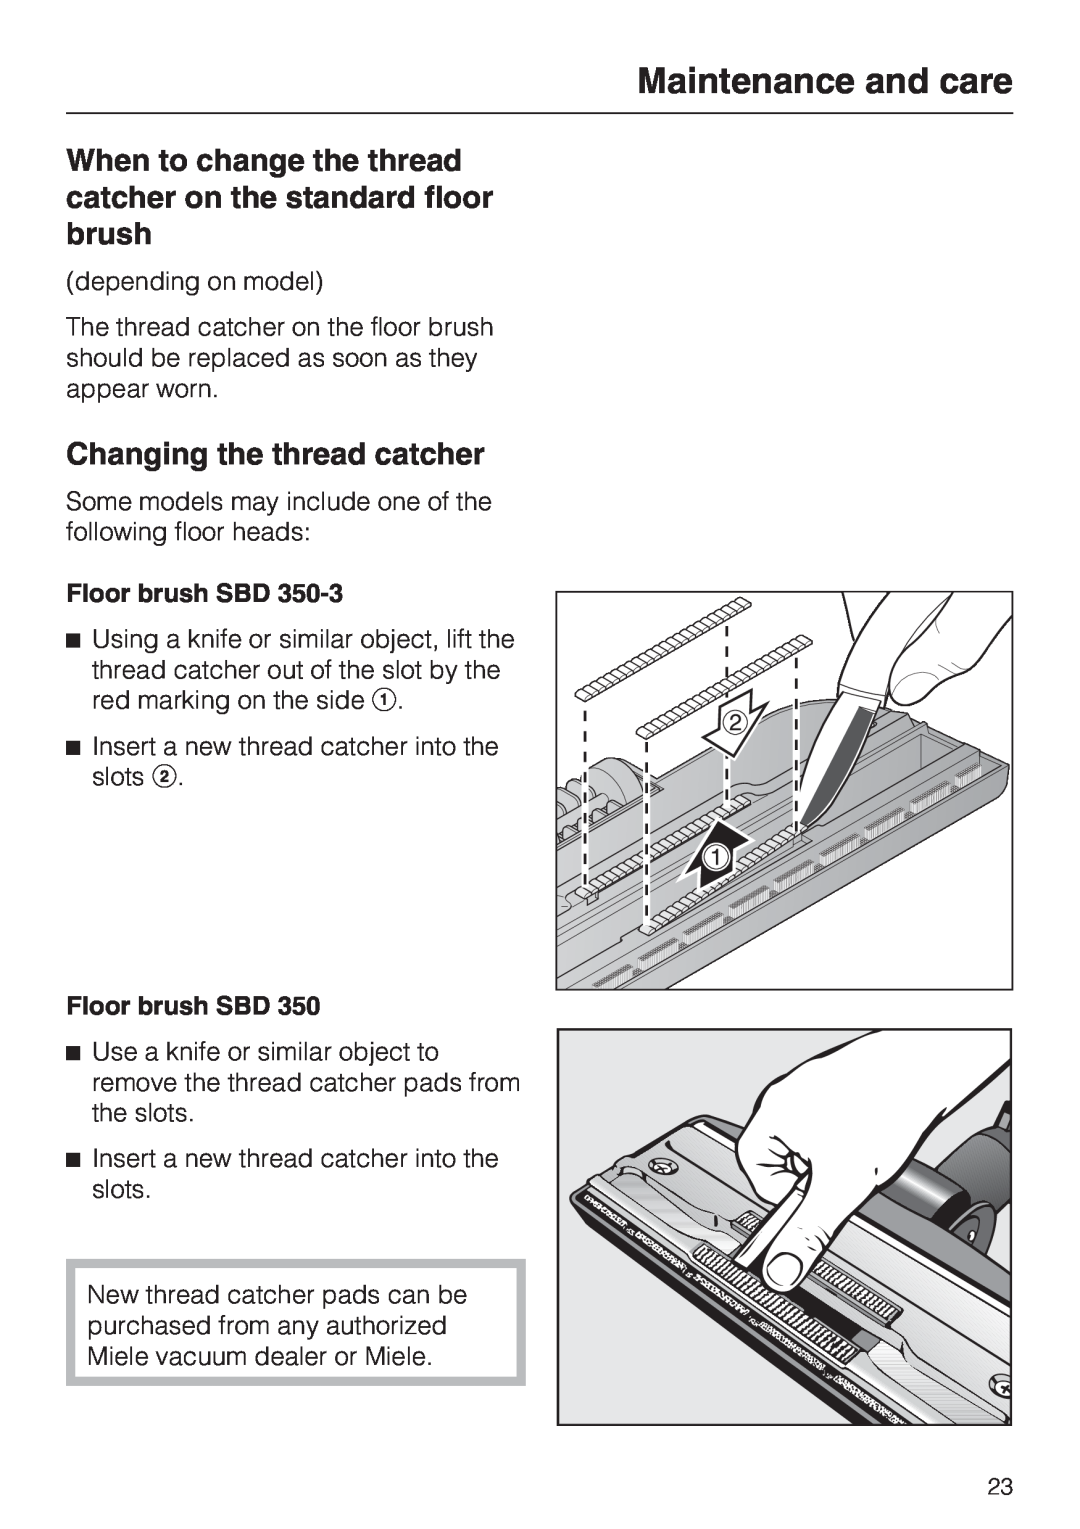 Miele S 2001 manual Changing the thread catcher, Floor brush SBD, Maintenance and care 